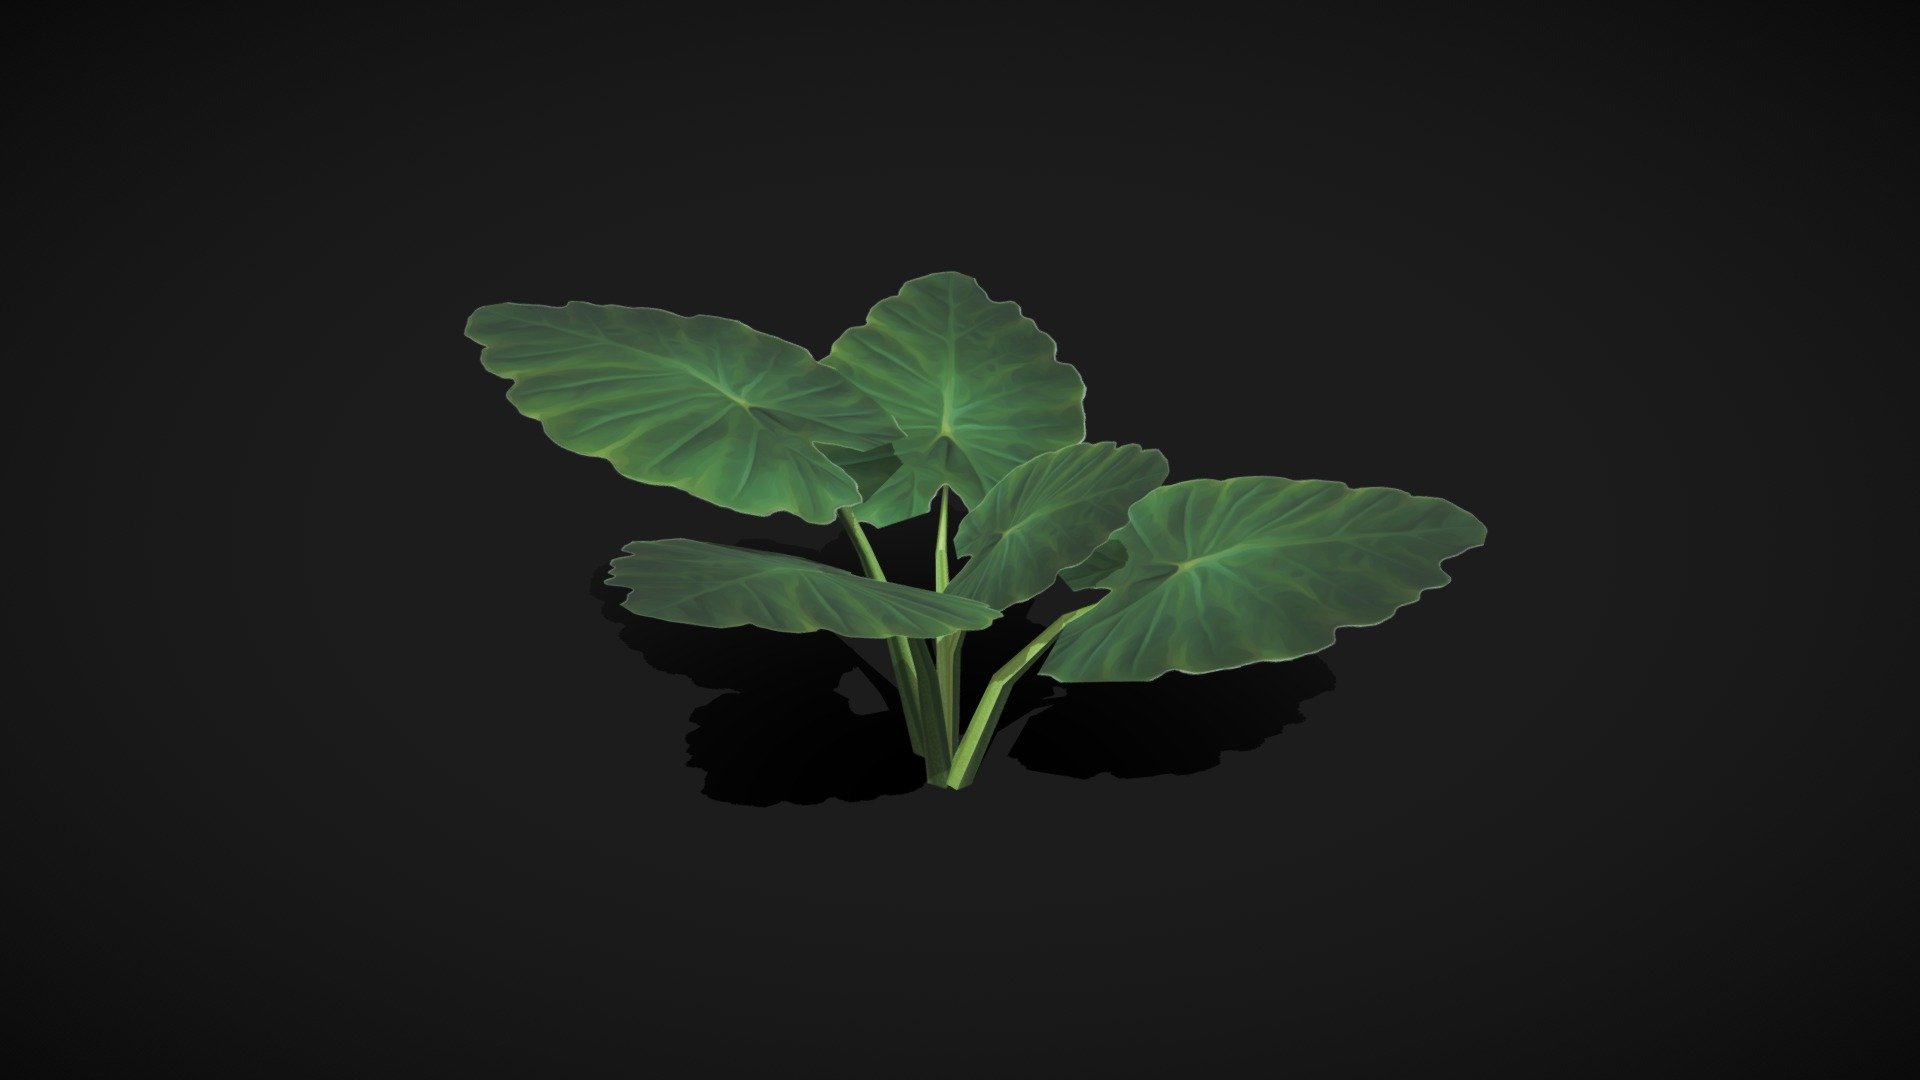 3D Cartoon Turtle low poly Model
Elephant Ear plant is a descriptive name given to a variety of tropical rain-forest plants including alocasia, remusatia, and xanthosoma that are often found for sale year round.Elephant Ear stalks are used as a Vietnamese herb which is first peeled and then cut. It is a popular addition to stir-frys and soups

Features:-

-Polycount is 117 polys (low poly, no turbosmooth)

-Fully UV mapped

-Fully texture model

Texture formats:- JPEG

-Cleaned up and optimized object

-Clean and proper mesh loop flow

-Can be used in unity and unreal by just drag and drop 3d model